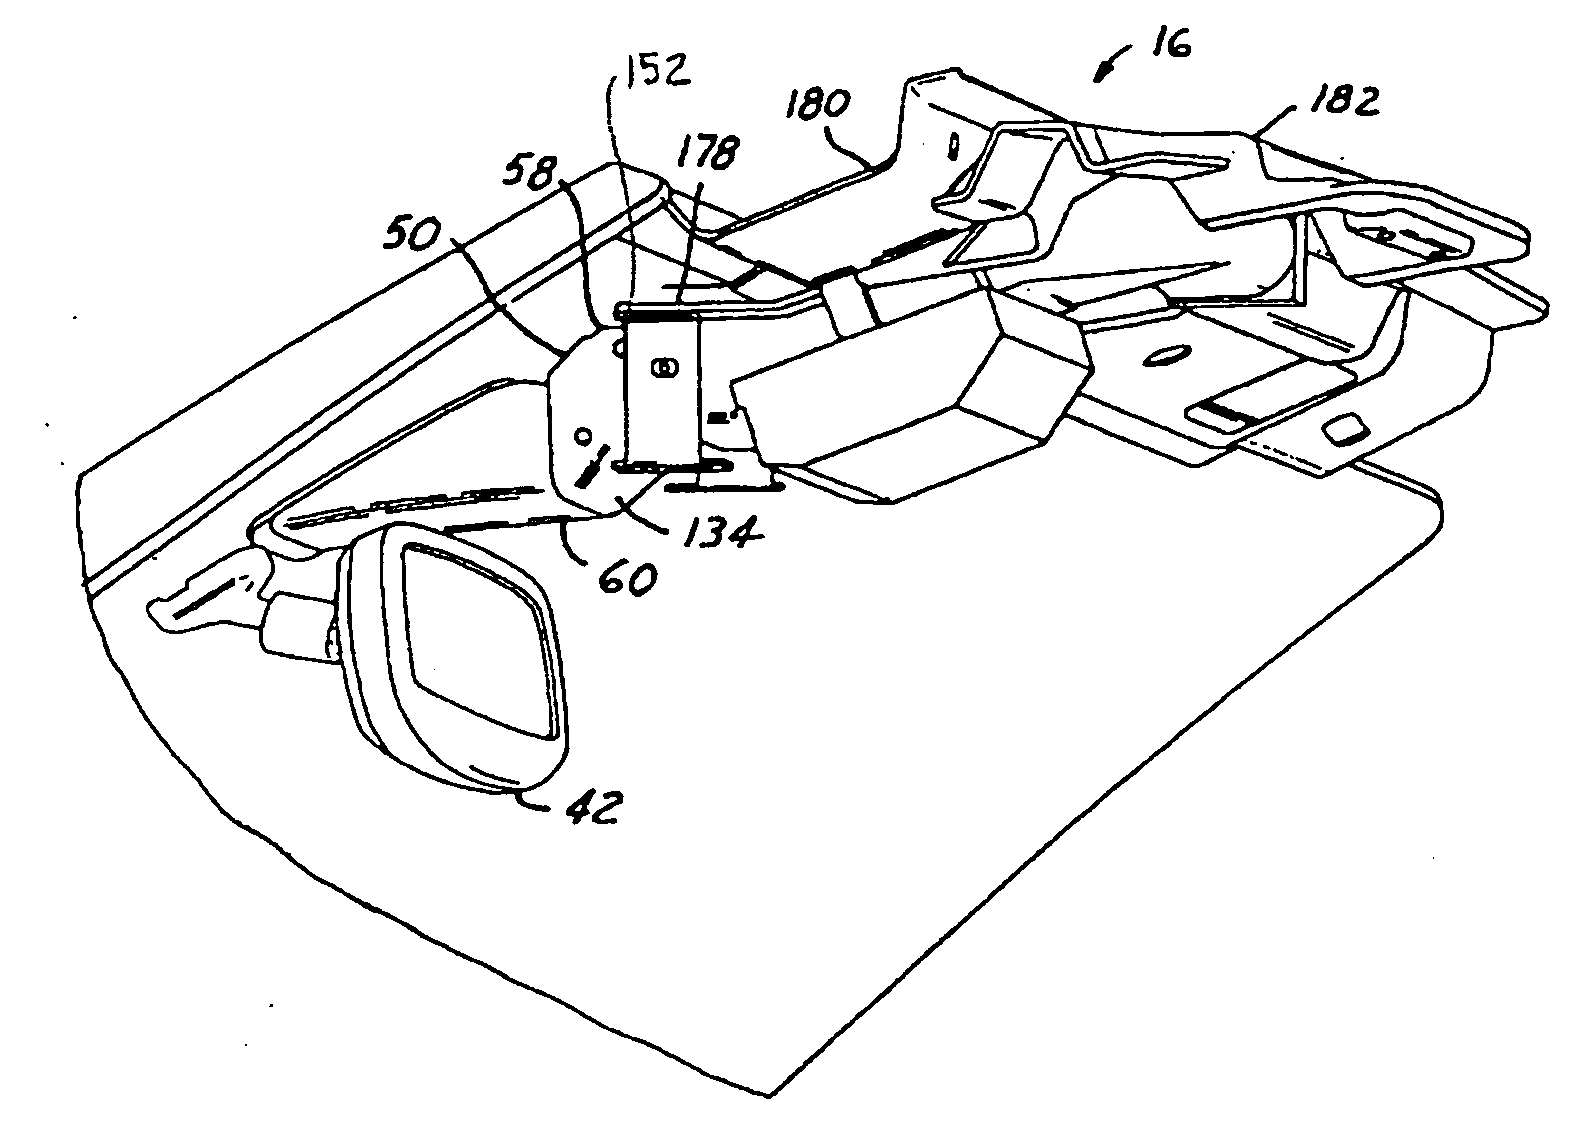 Component alignment maintaining module for an active night vision system mounted within an interior cabin of a vehicle